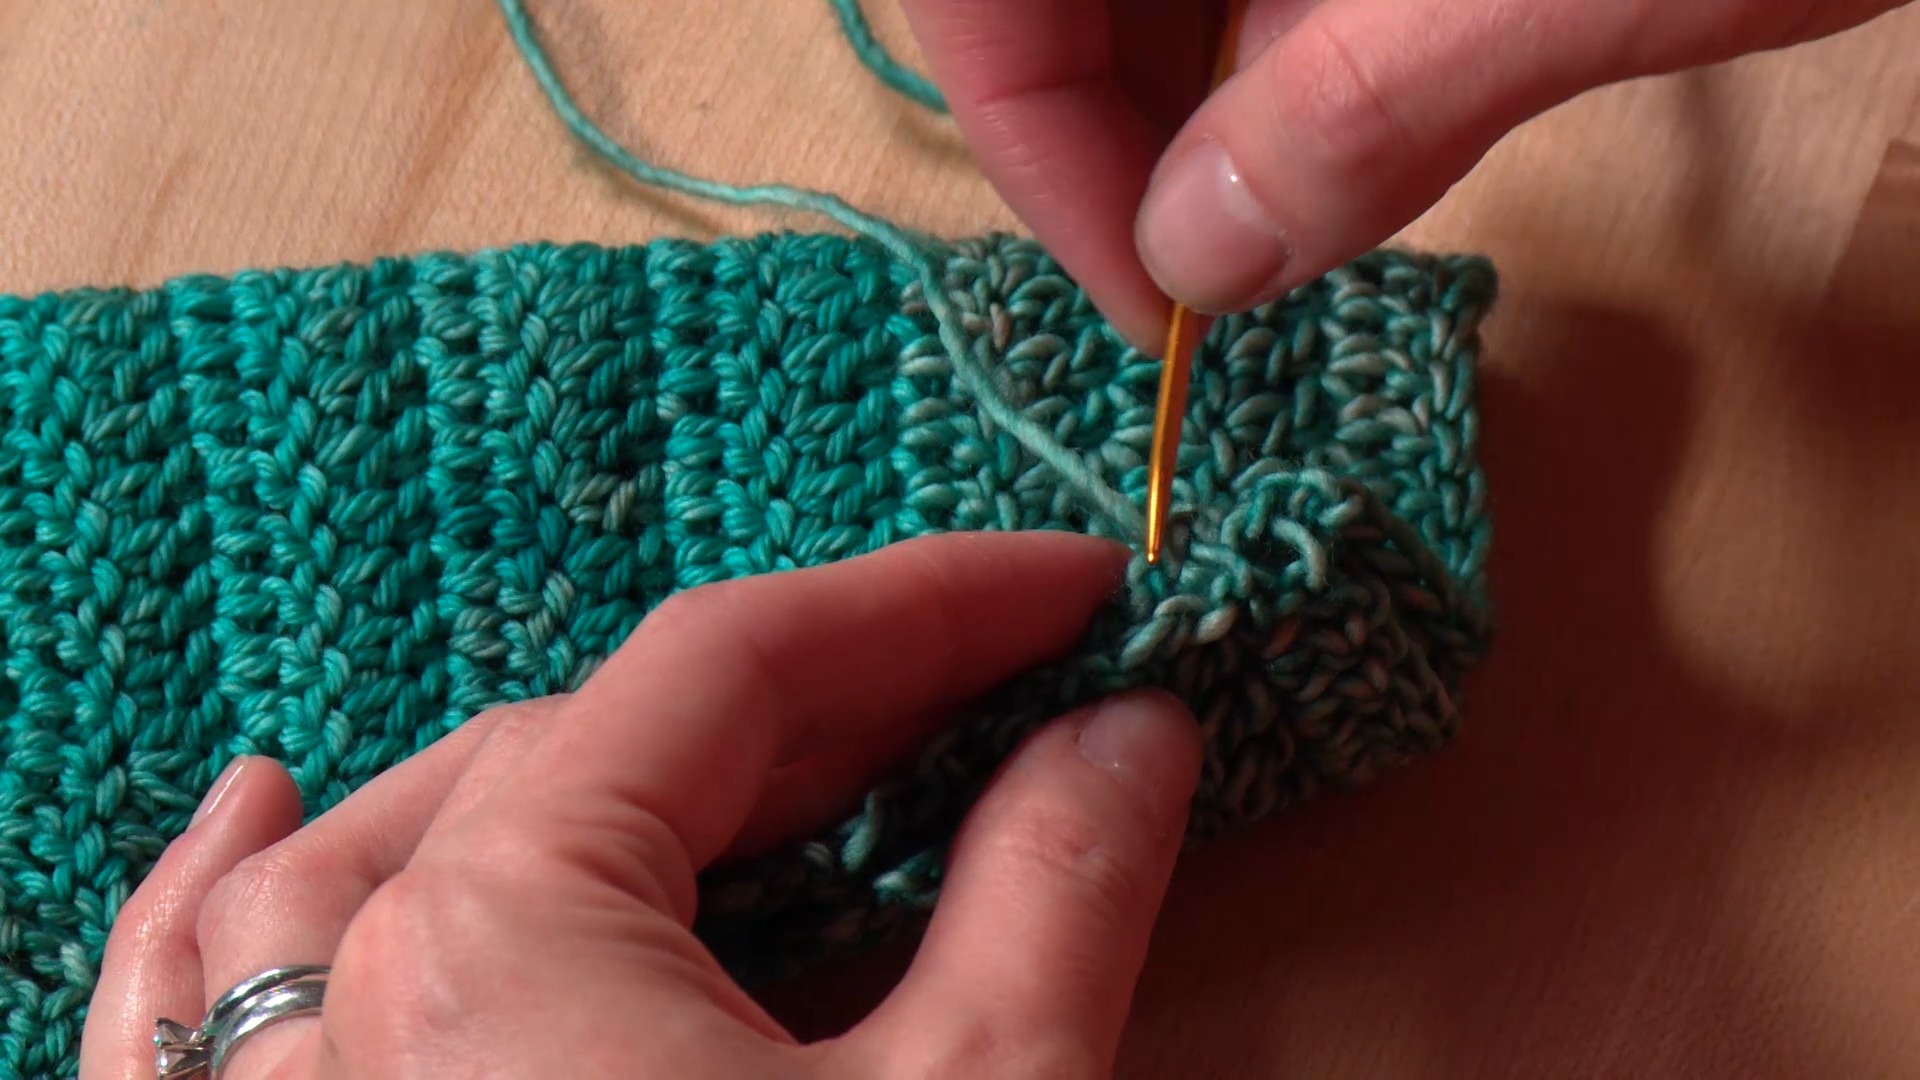 Session 6: Assembling a Sweater